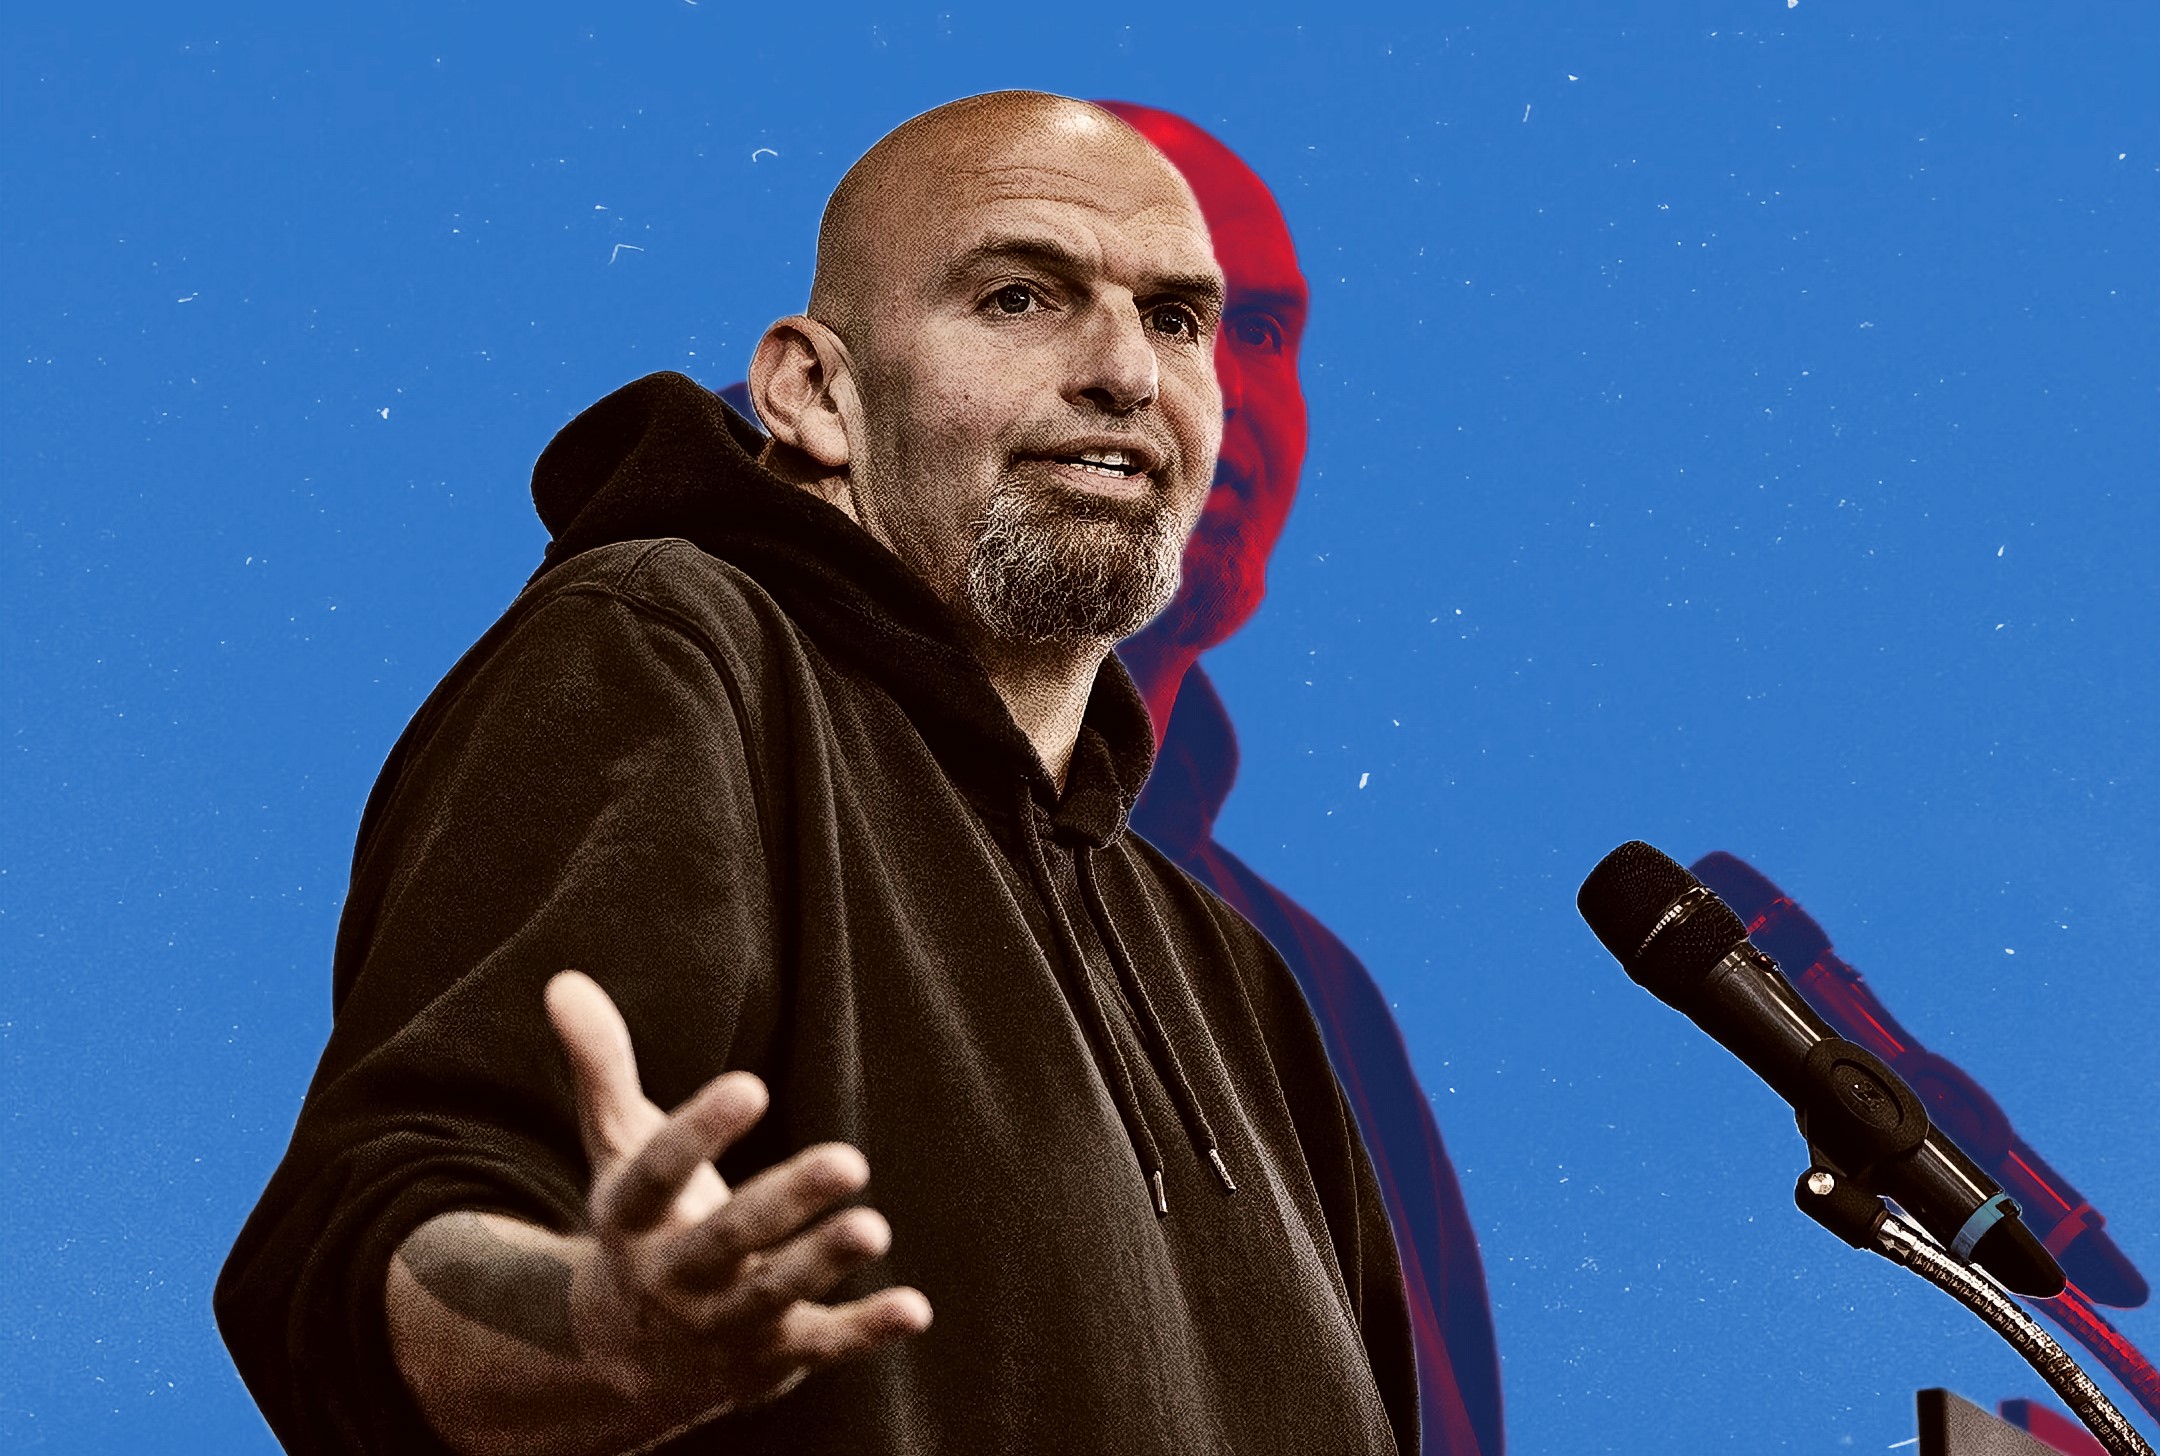 John Fetterman at a campaign event. The Senator was rushed to the hospital. Could this be a sign of troubled times for Pennsylvania? John Fetterman/Alexander J. Williams III edit/Pop Acta